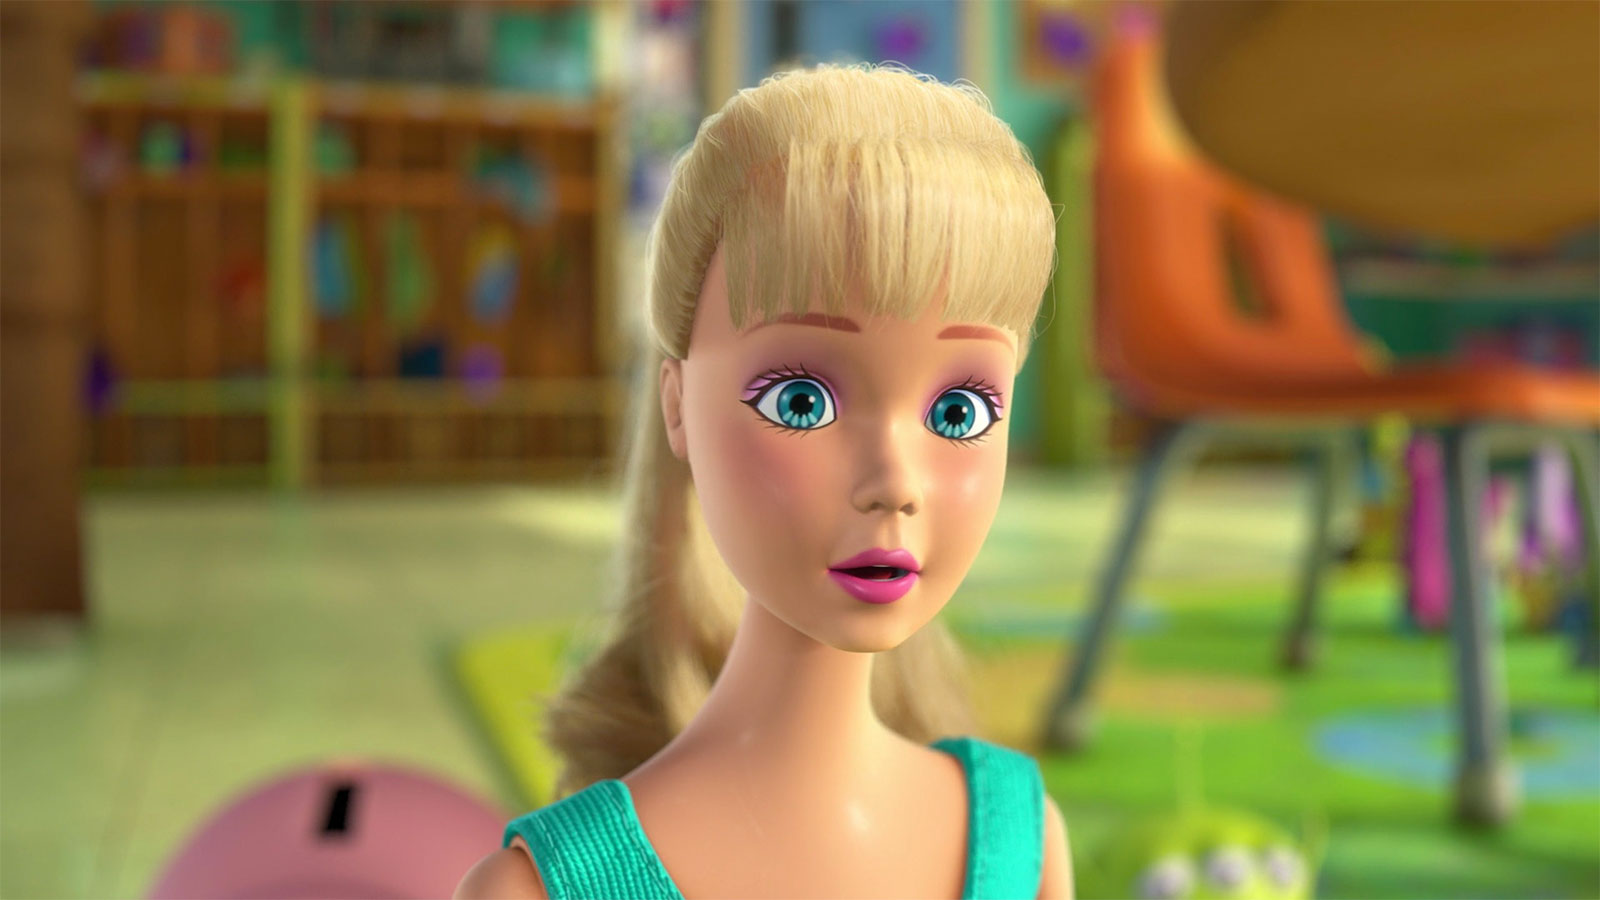 We’ll Honestly Be Impressed If You Score 17/22 on This General Knowledge Quiz Toy Story Barbie